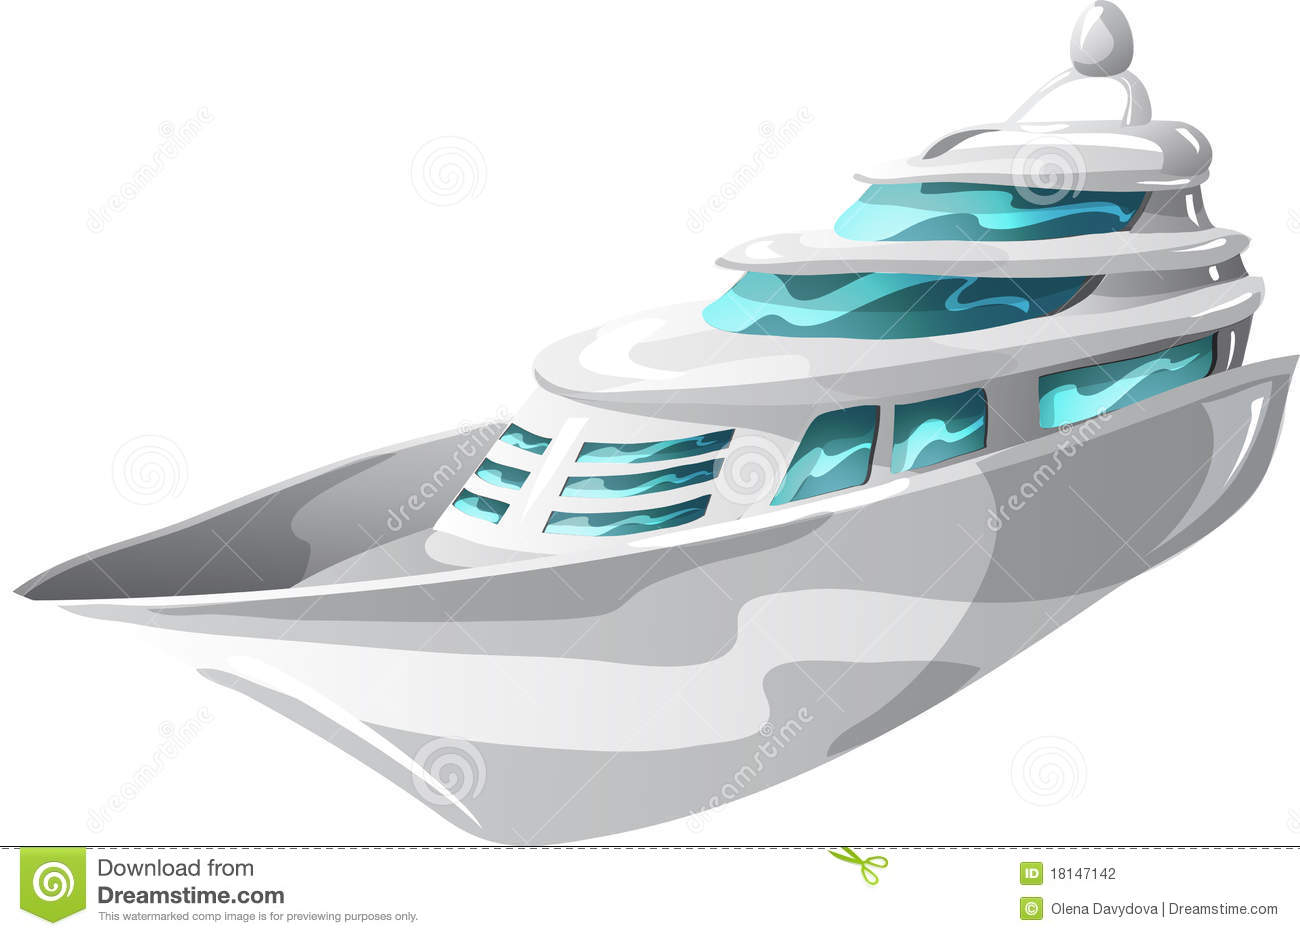 Super yacht clipart - Clipground